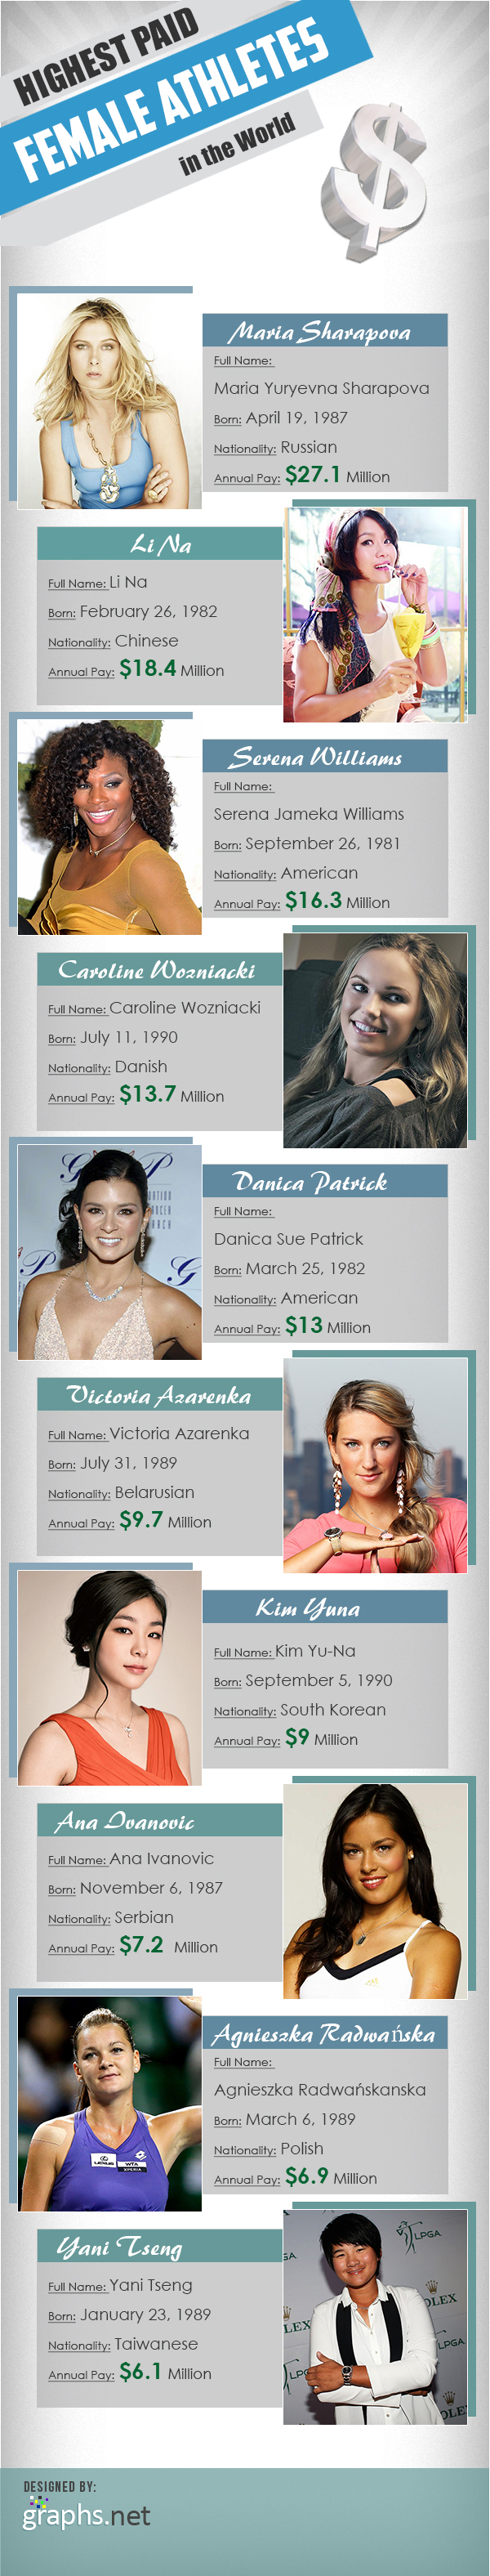 Highest Paid Female Athletes in the World 